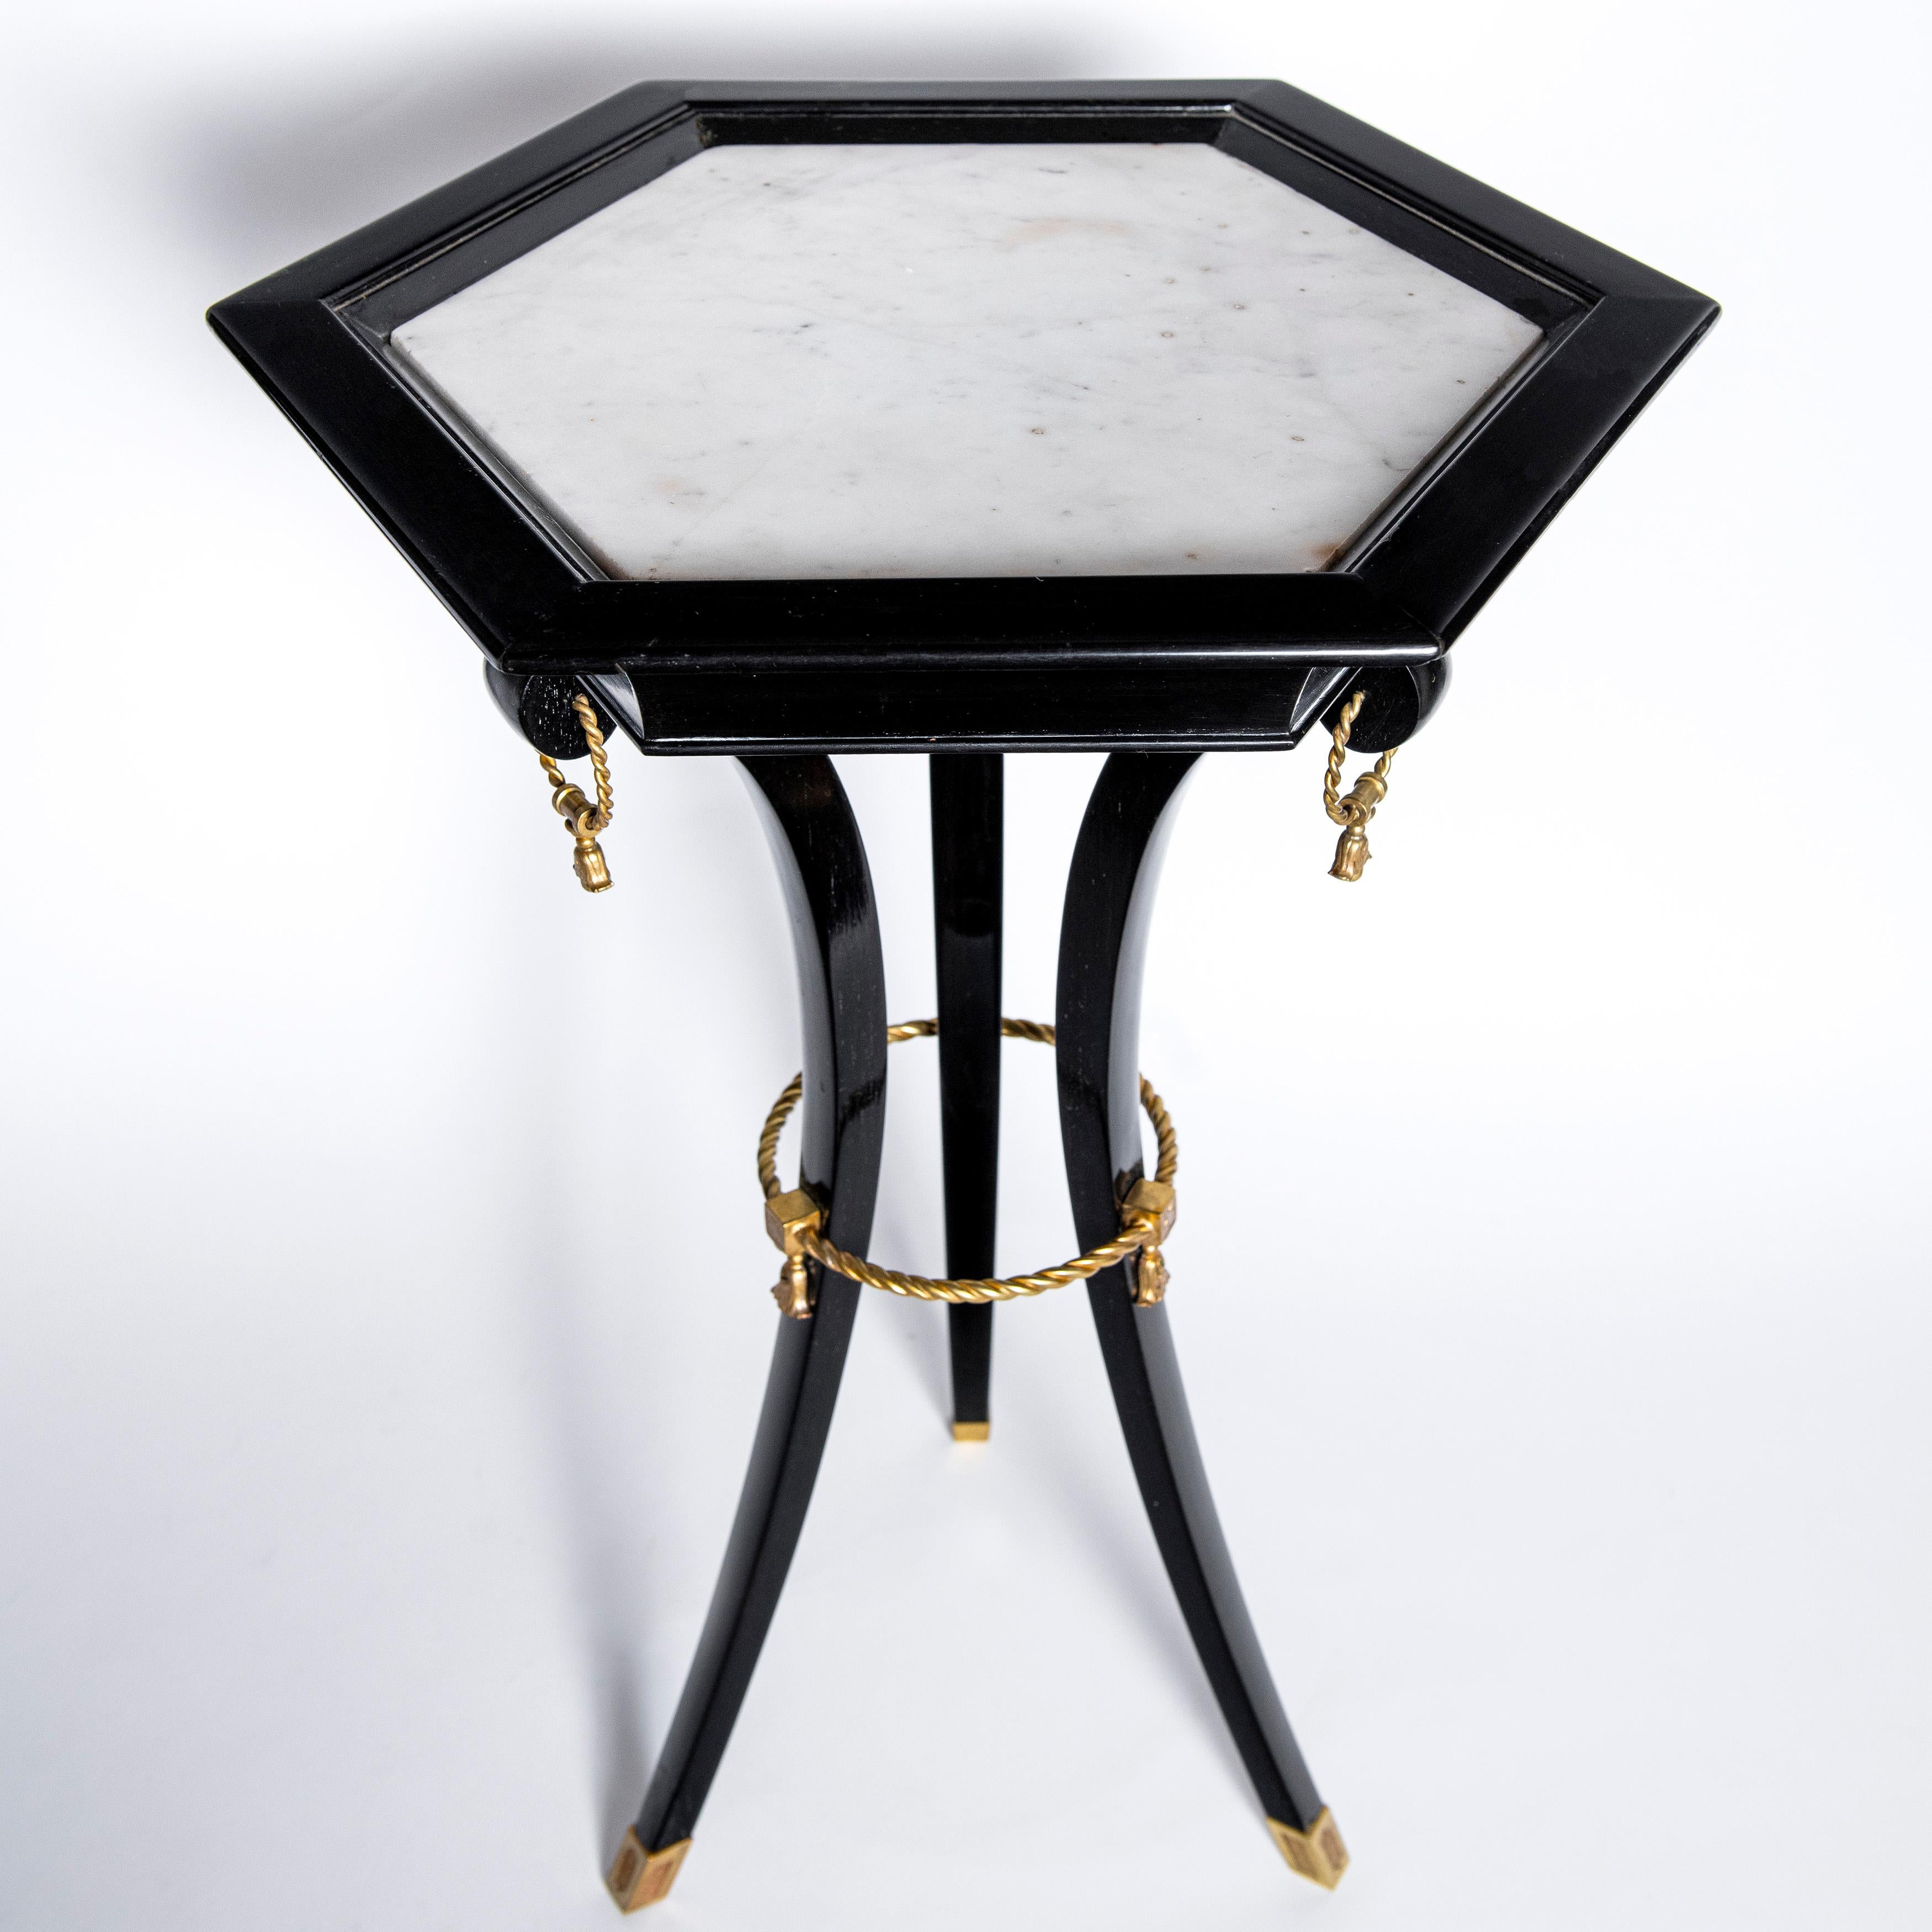 Pair of marble, wood and gilt bronze side tables, France, circa 1950.
Attributed to Maison Jansen.